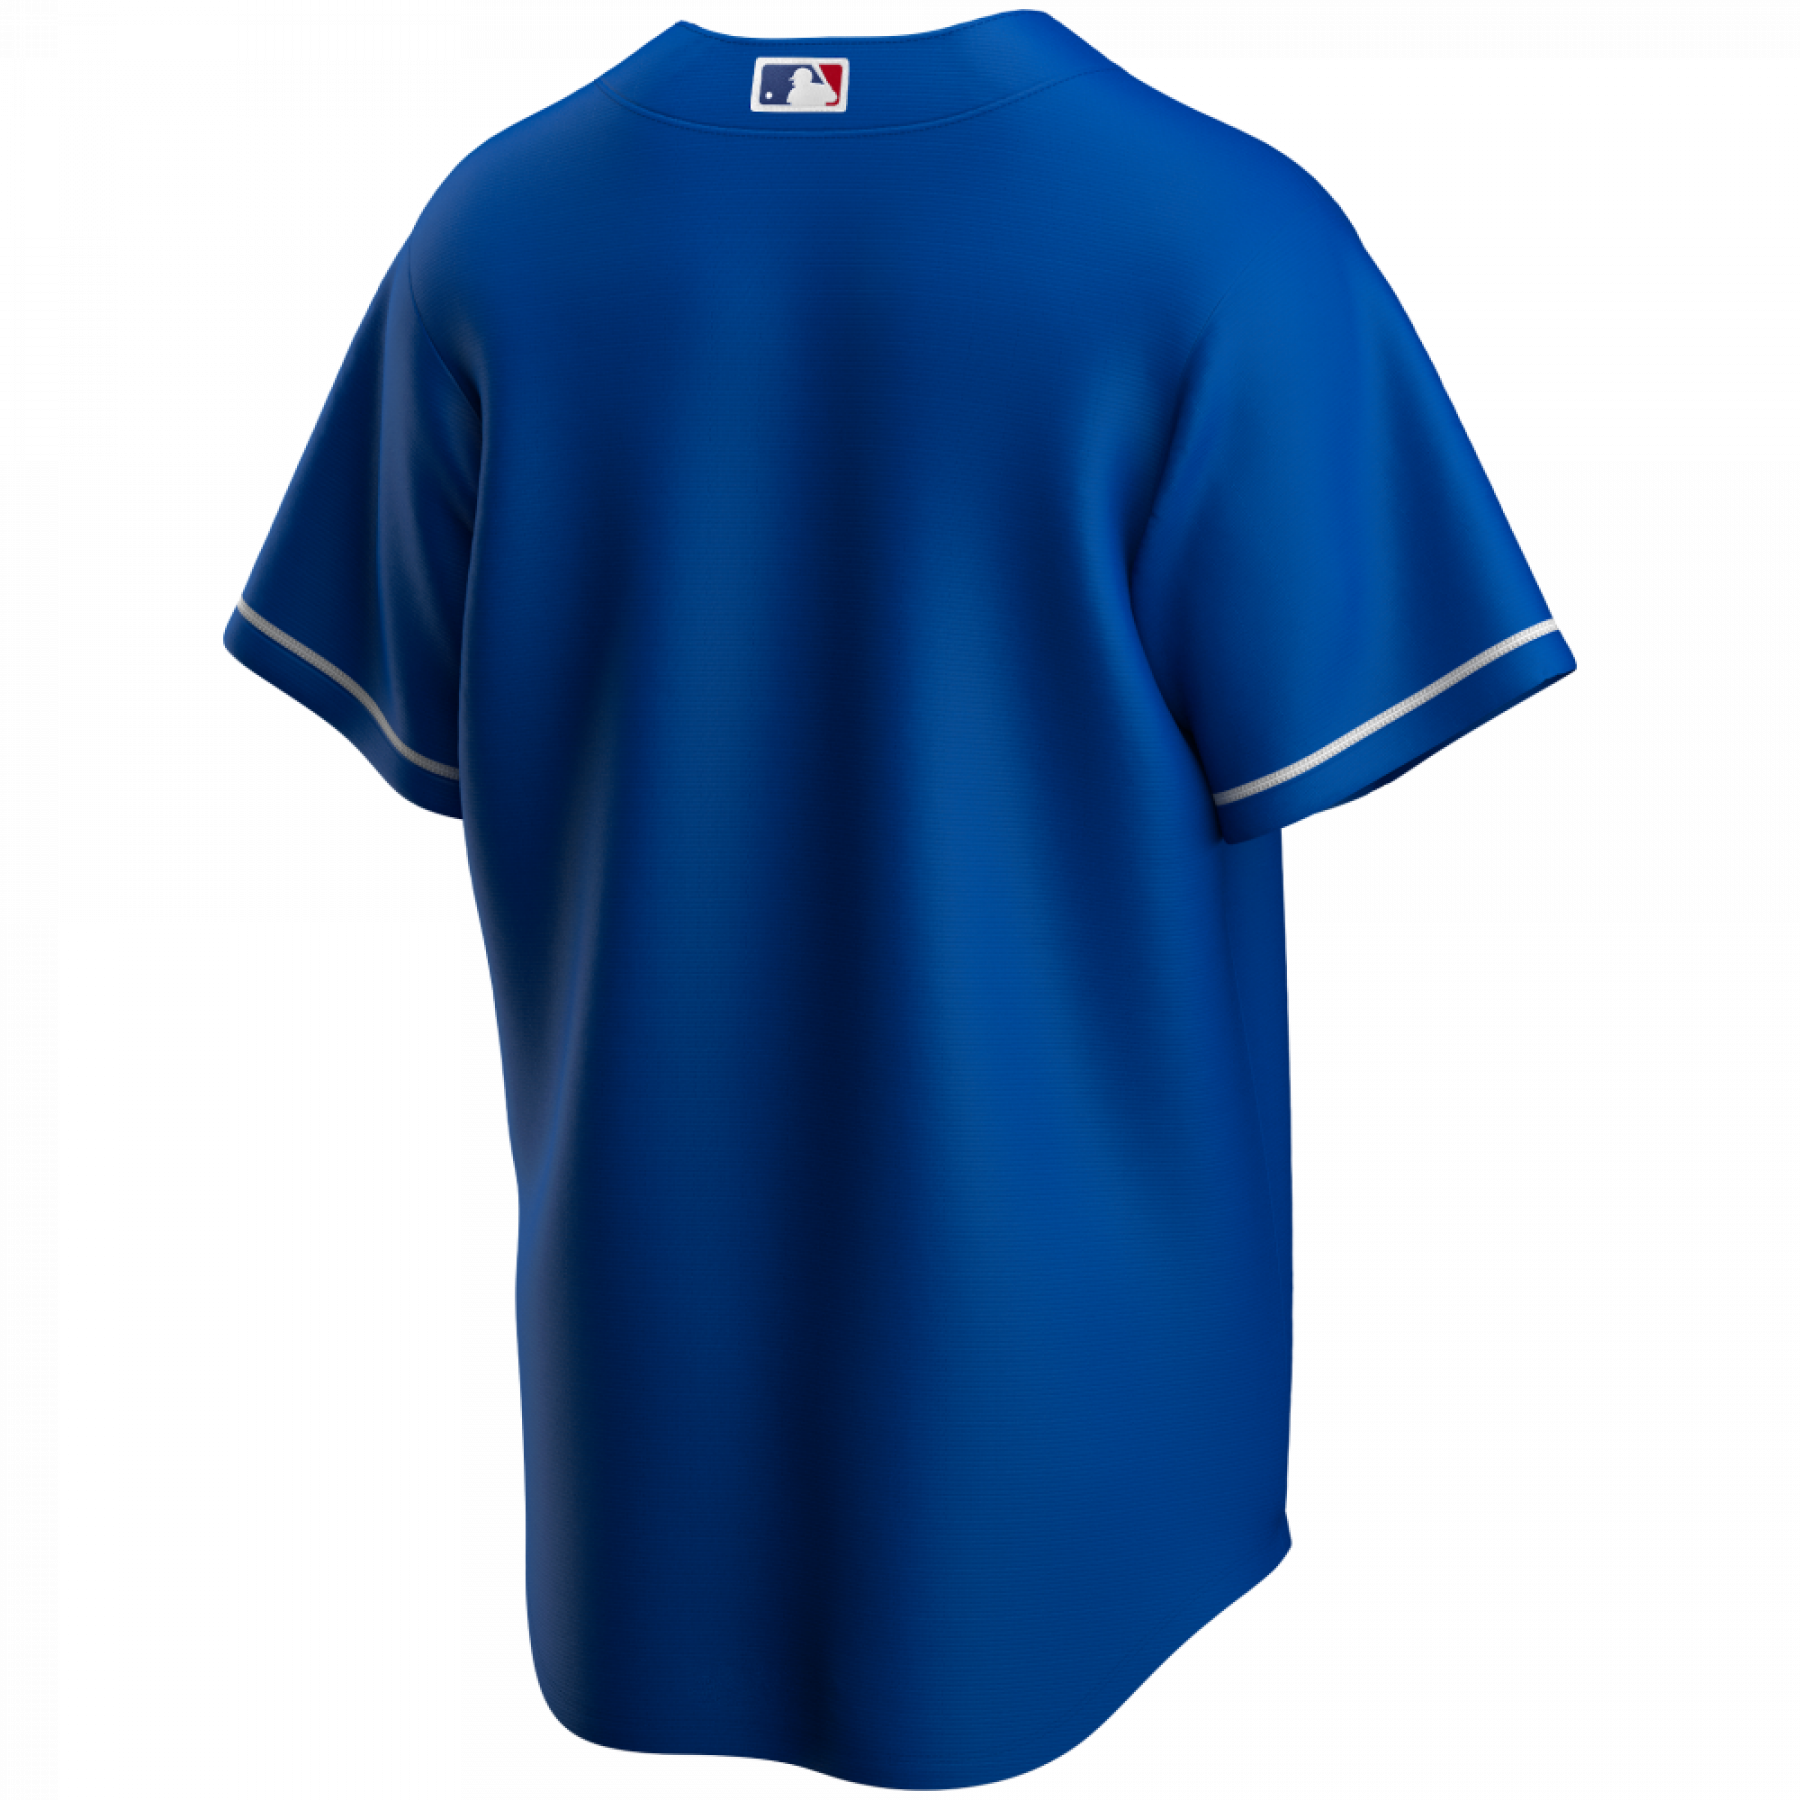 Camisola Official Replica Los Angeles Dodgers away